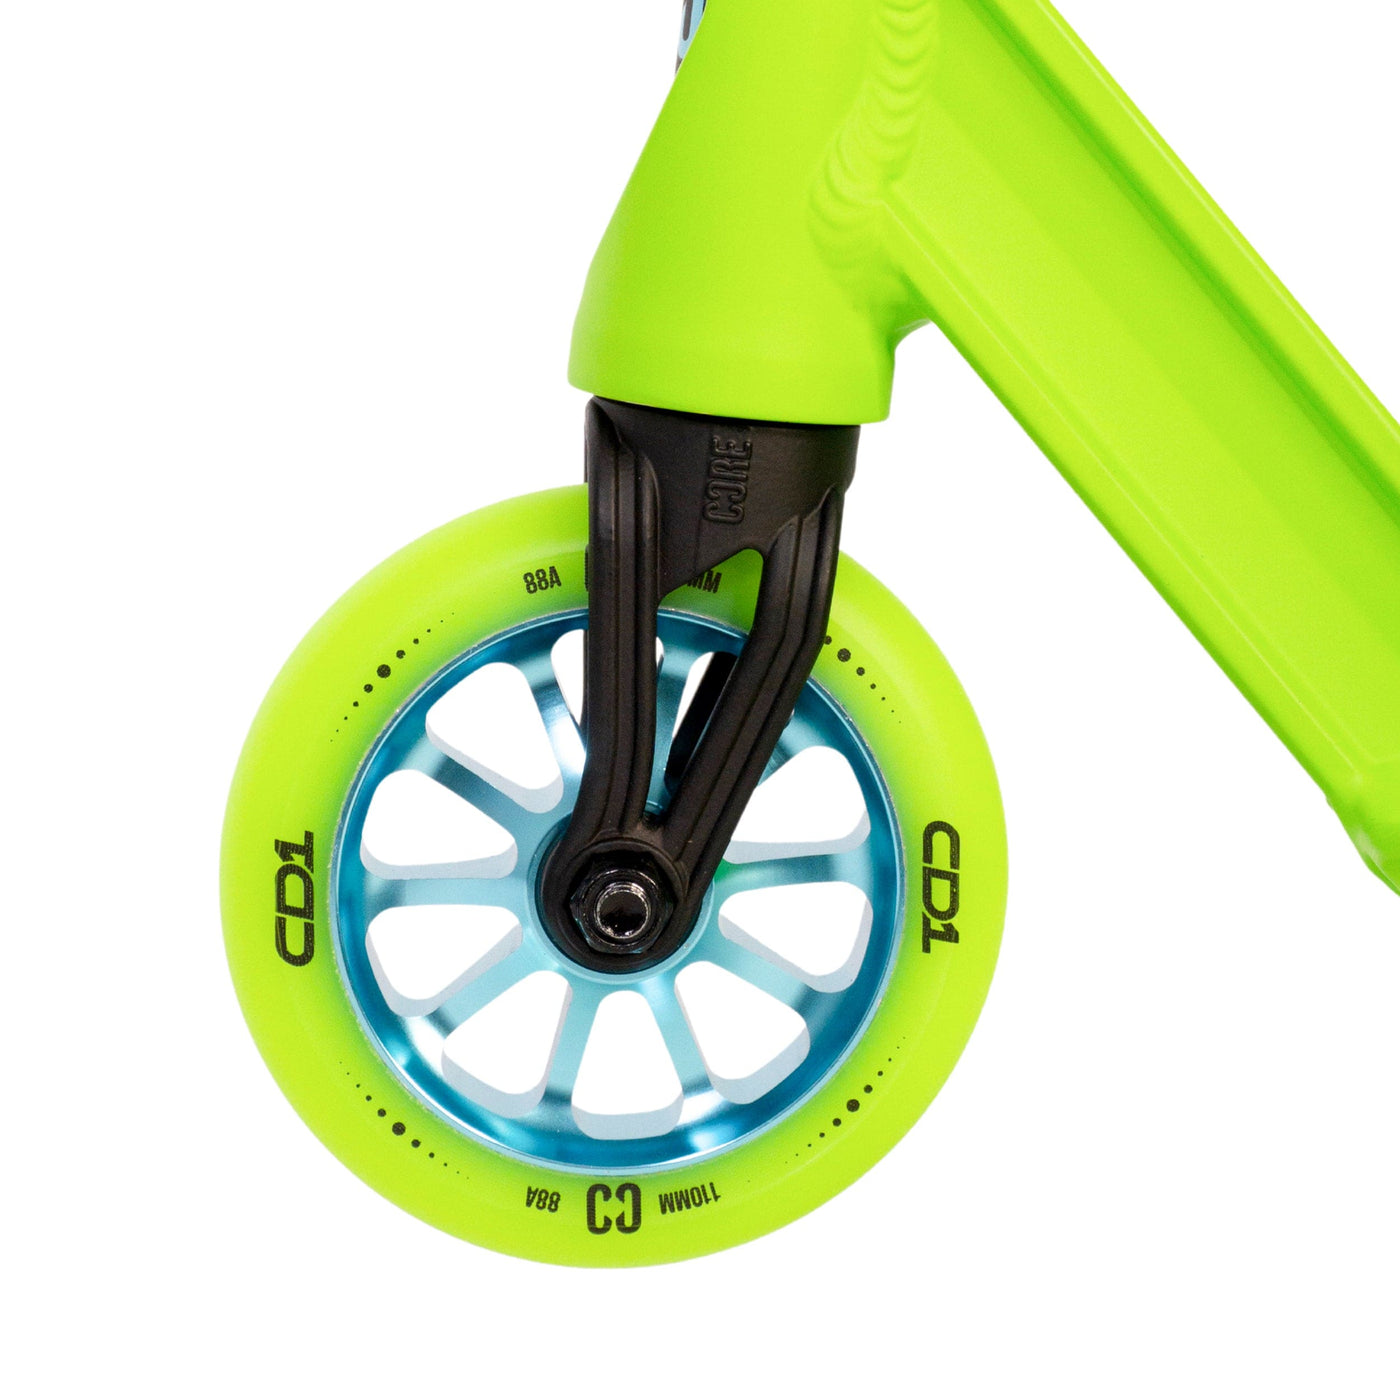 CORE CD1 Complete Stunt Scooter Lime & Teal I Adult Stunt Scooter Front Wheel Zoom